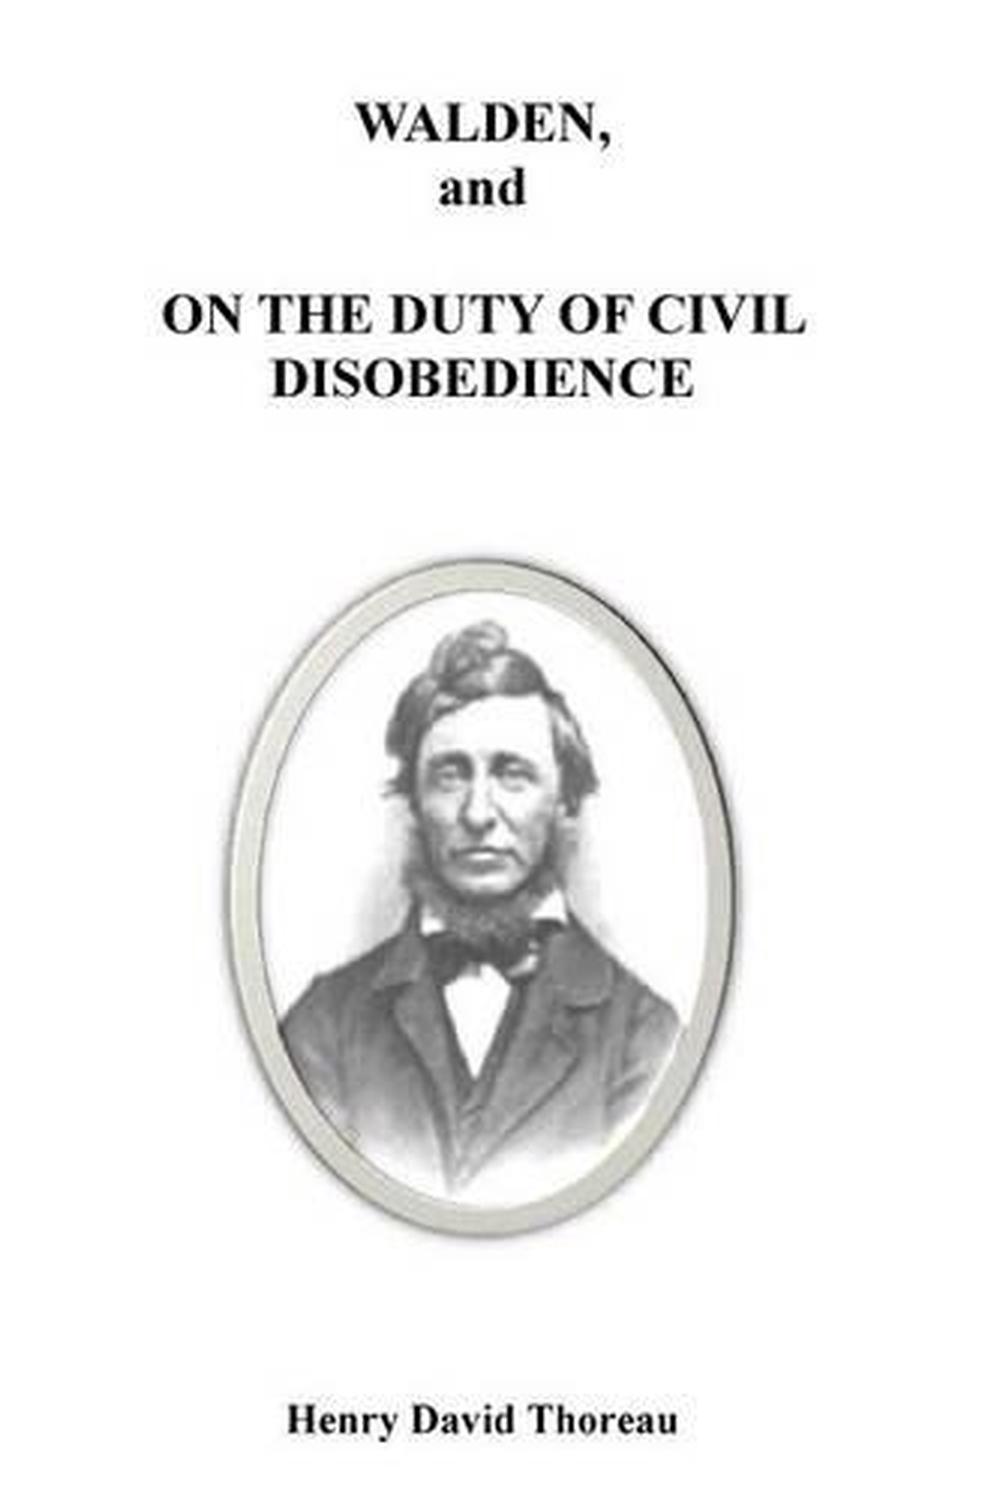 thoreau walden and civil disobedience